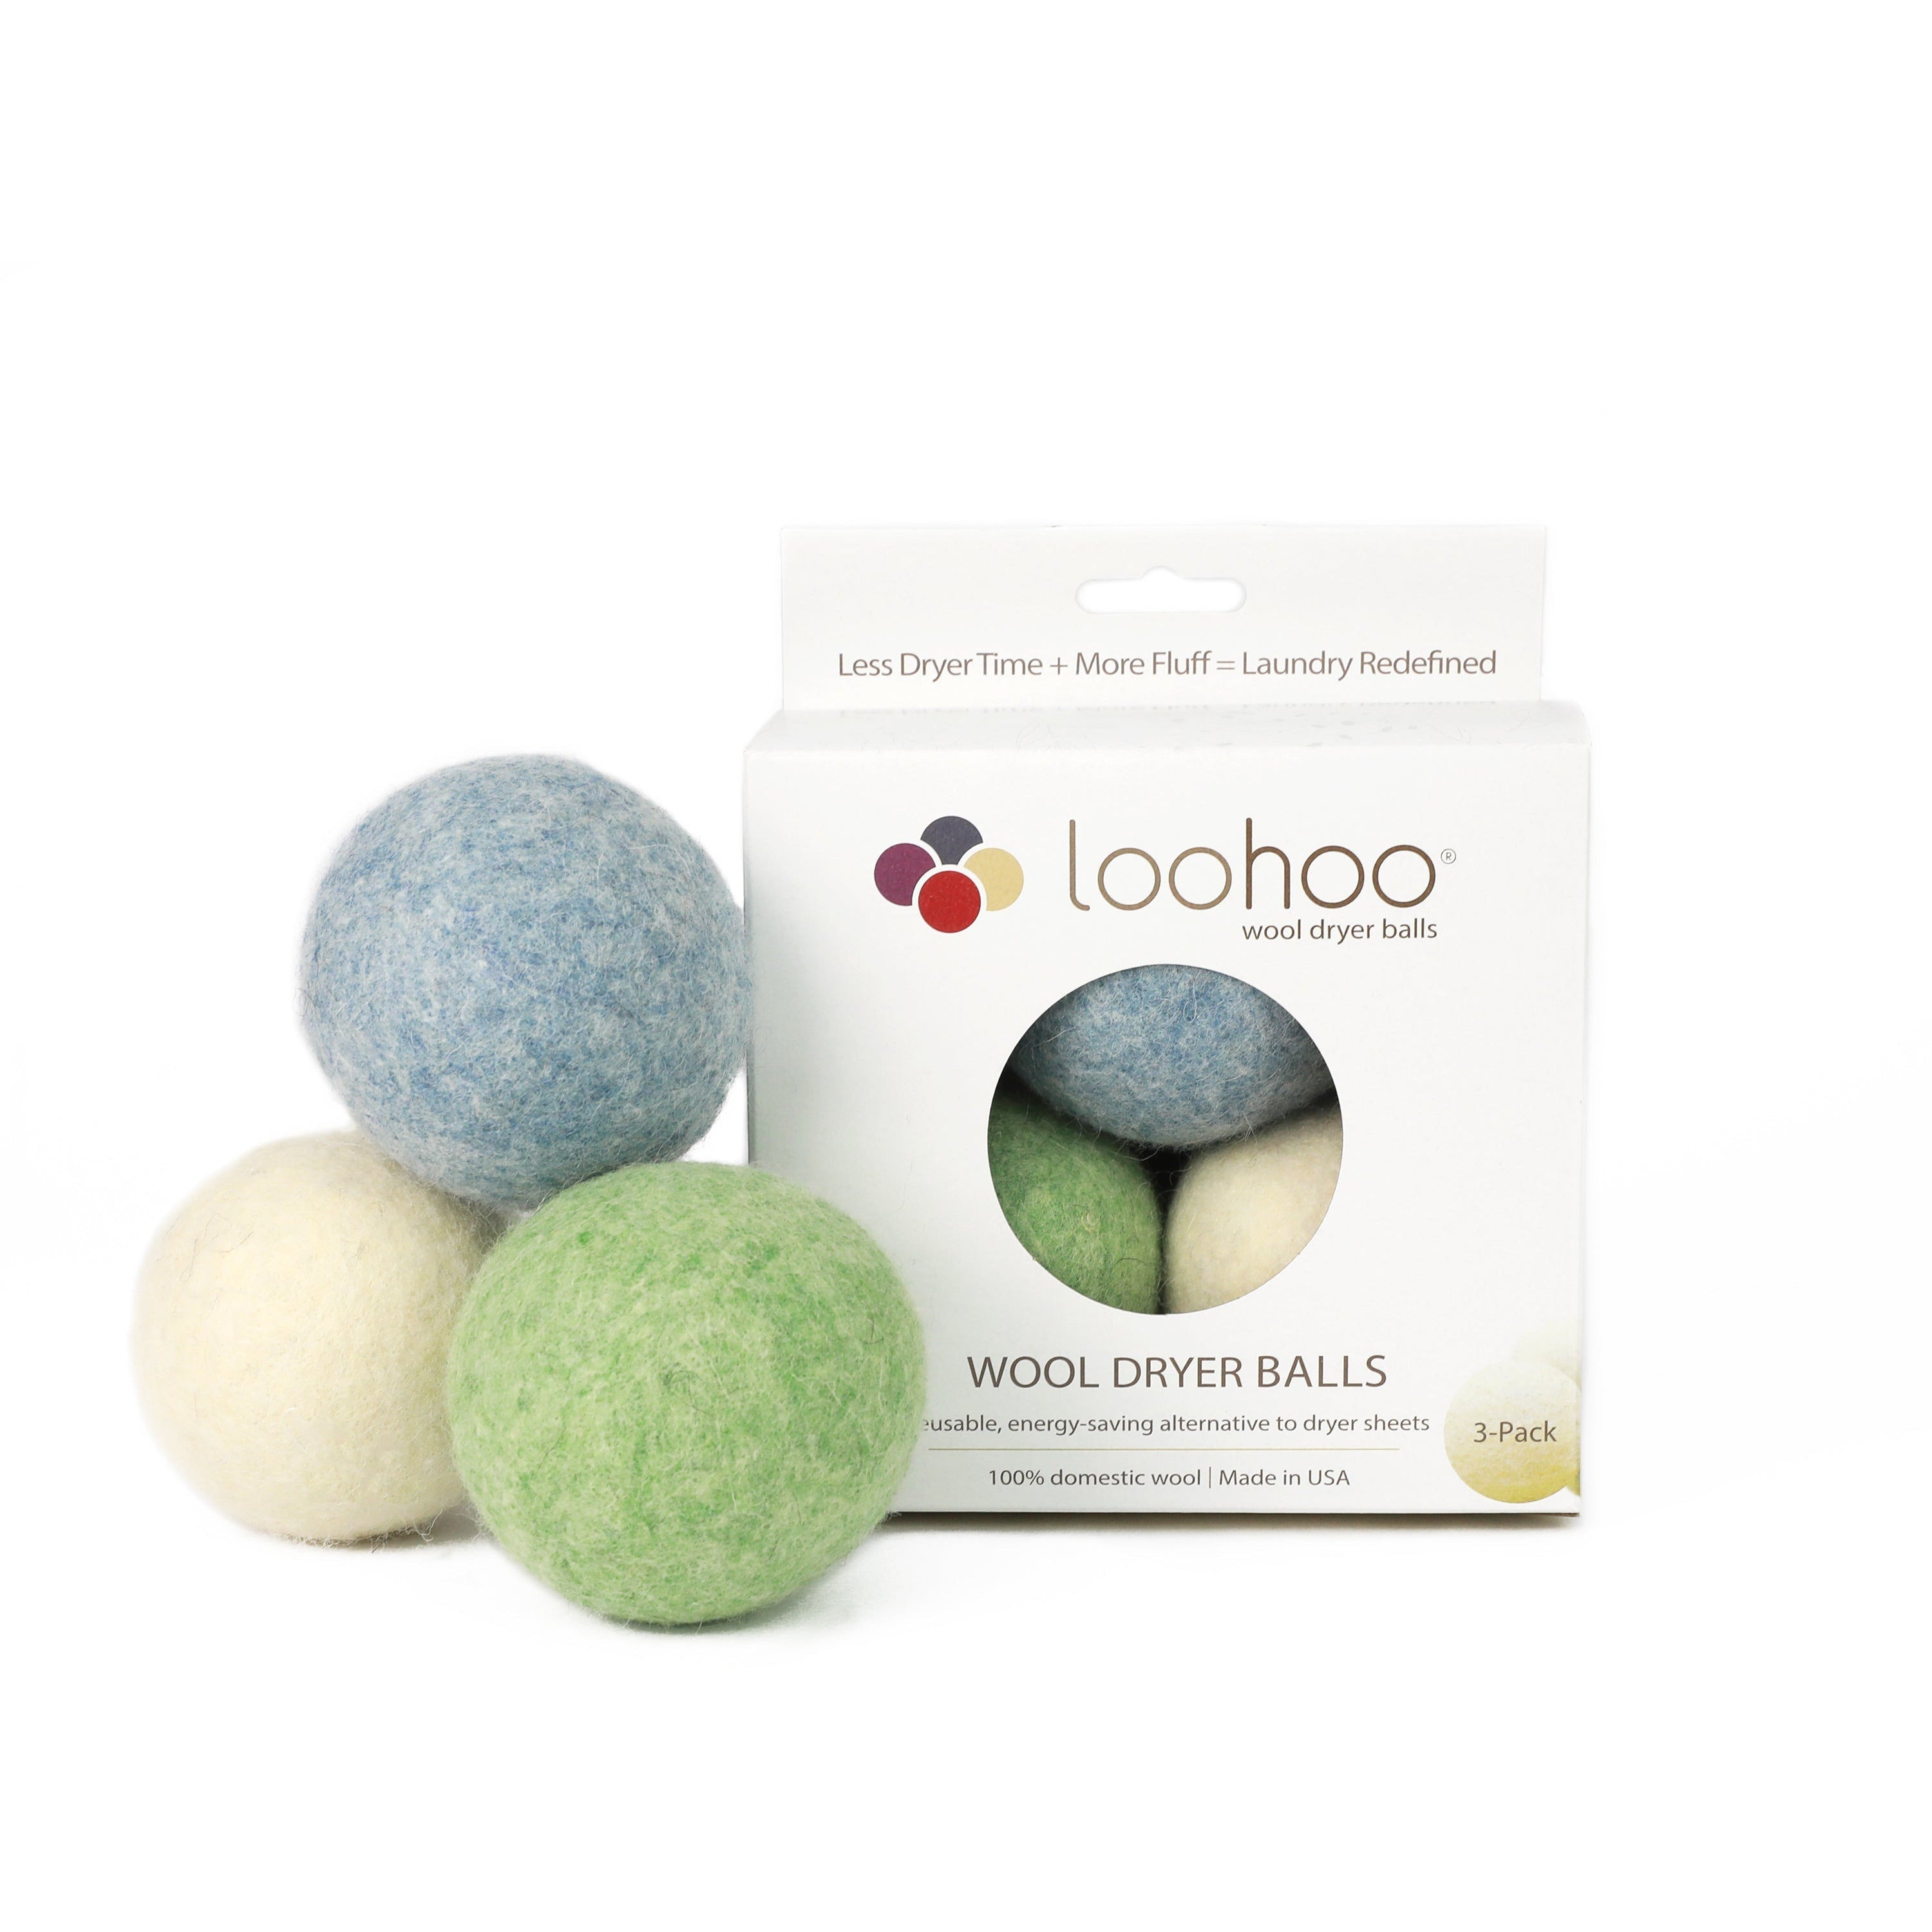 How To Use Wool Dryer Balls Plus Do They Actually Work?